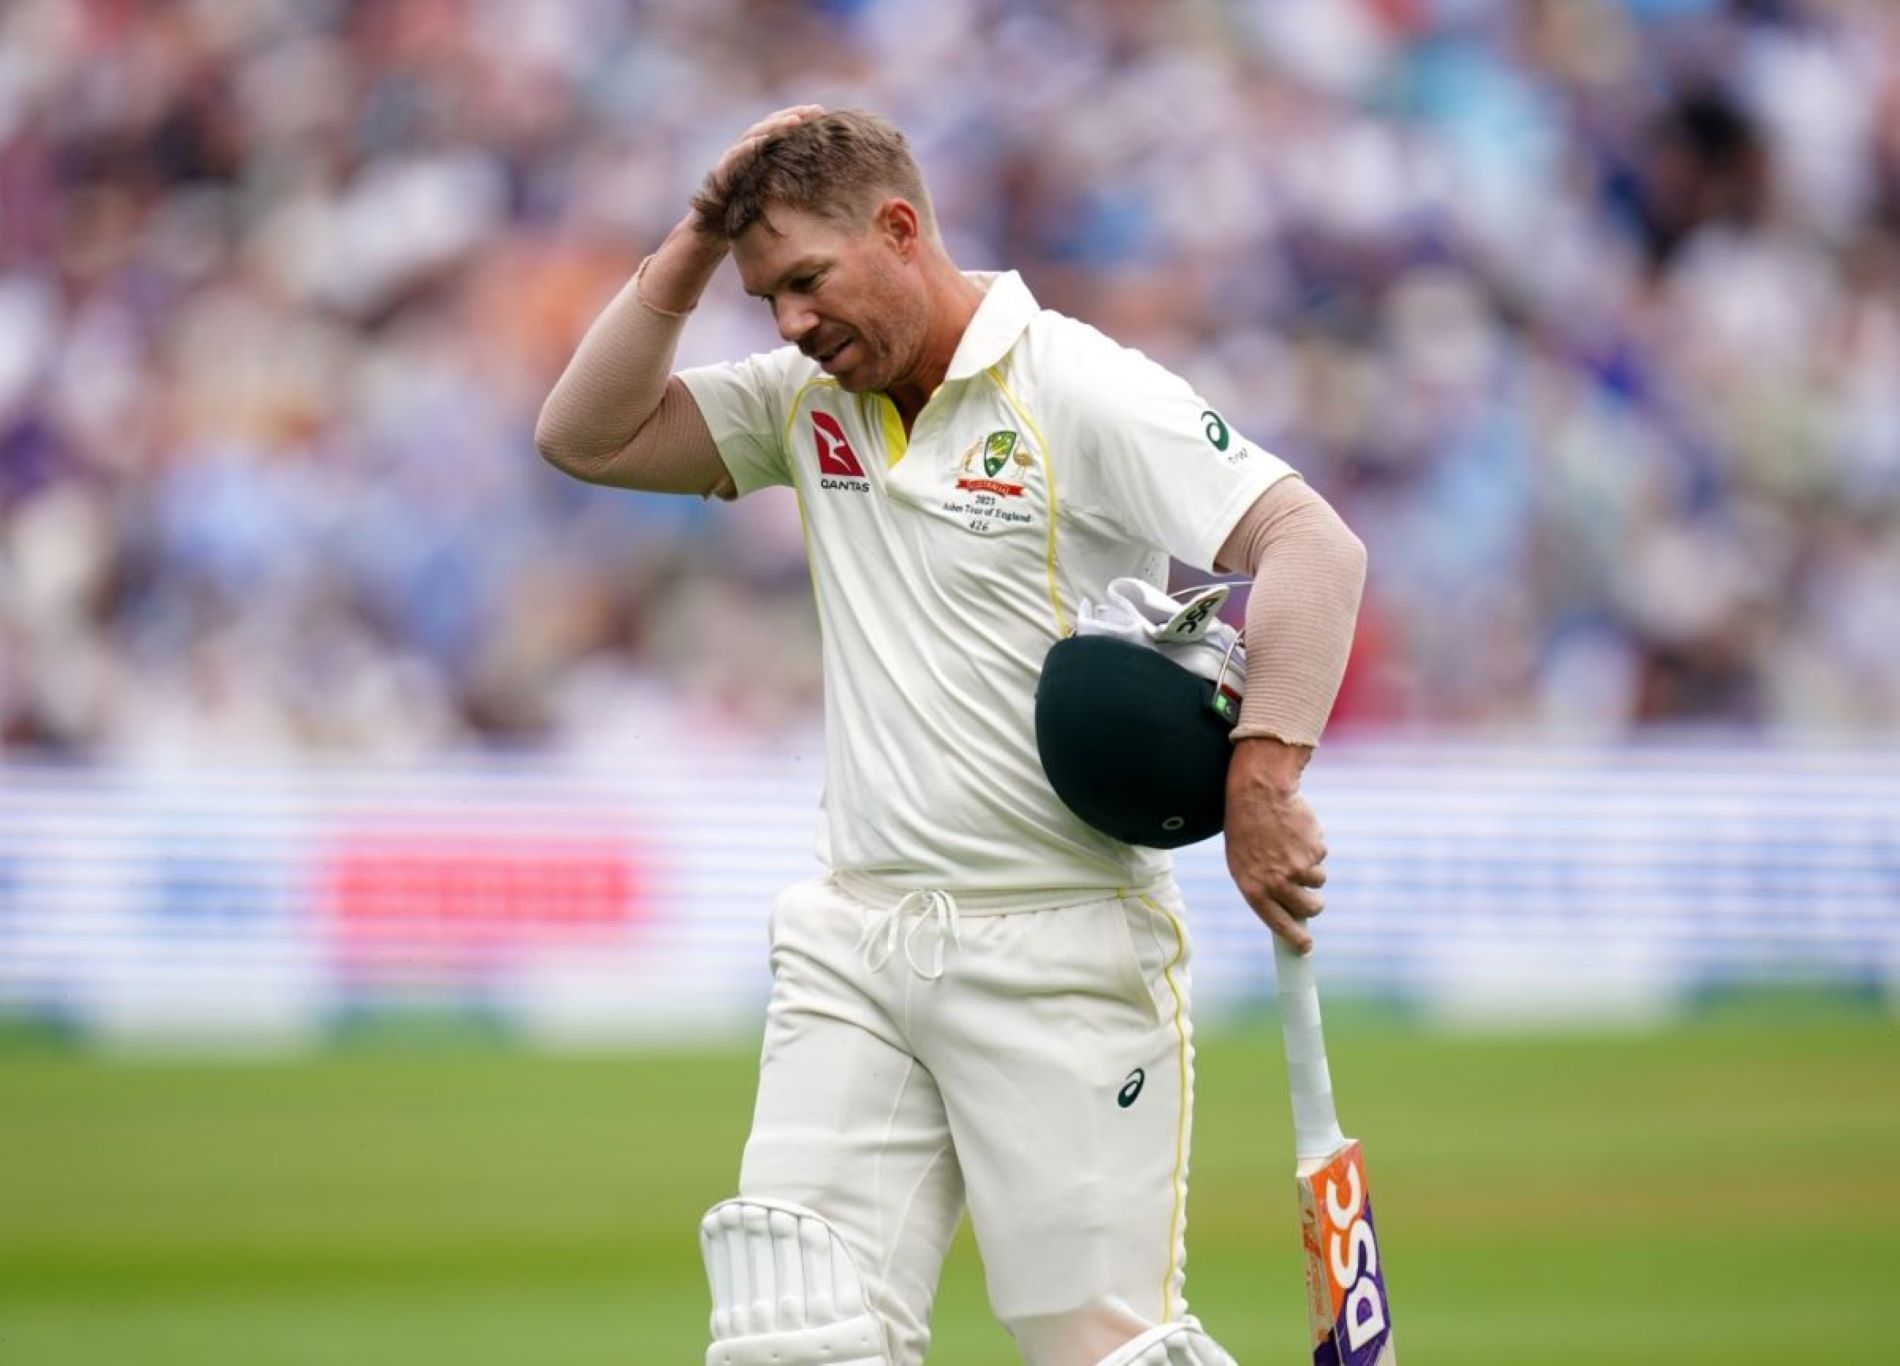 David Warner endured another low score in the first innings of the first Ashes Test